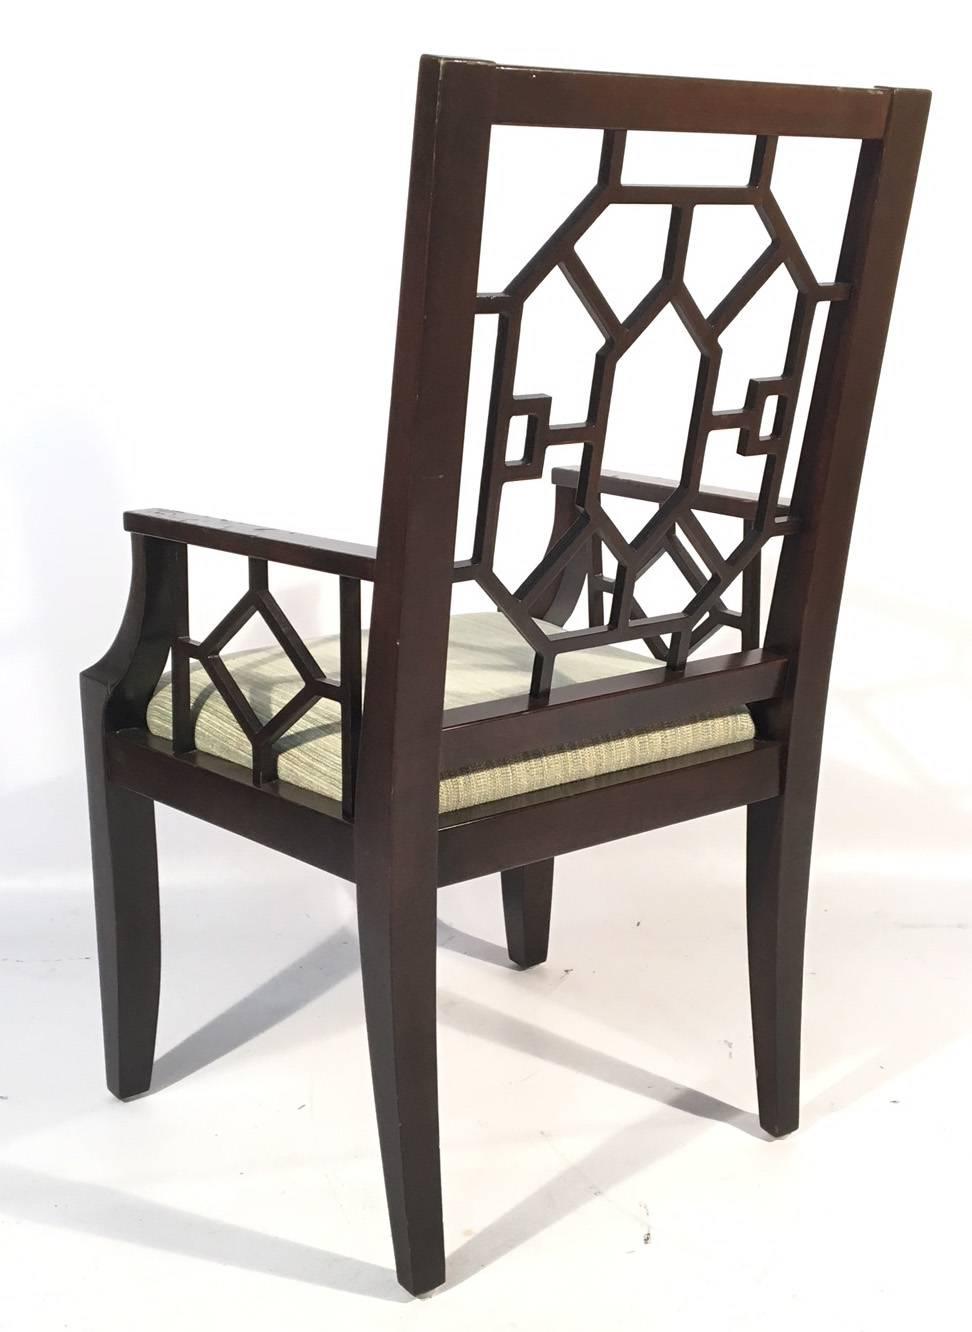 American Asian Chinoiserie Dining Chairs from the Breakers Hotel